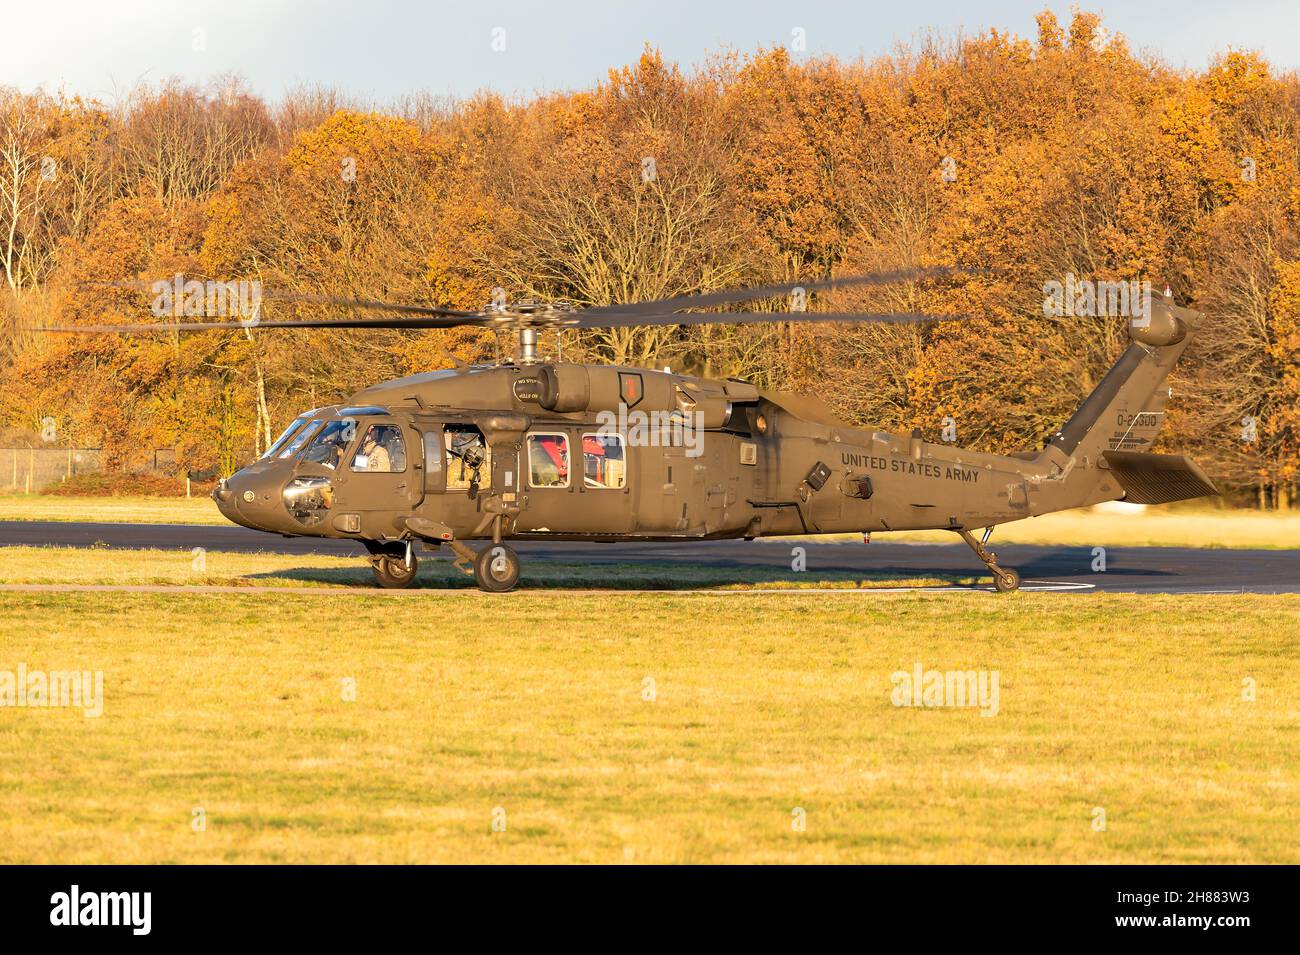 A Sikorsky UH-60 Black Hawk twin-engine utility helicopter of the US Army at the Gilze-Rijen Air Base, The Netherlands. Stock Photo